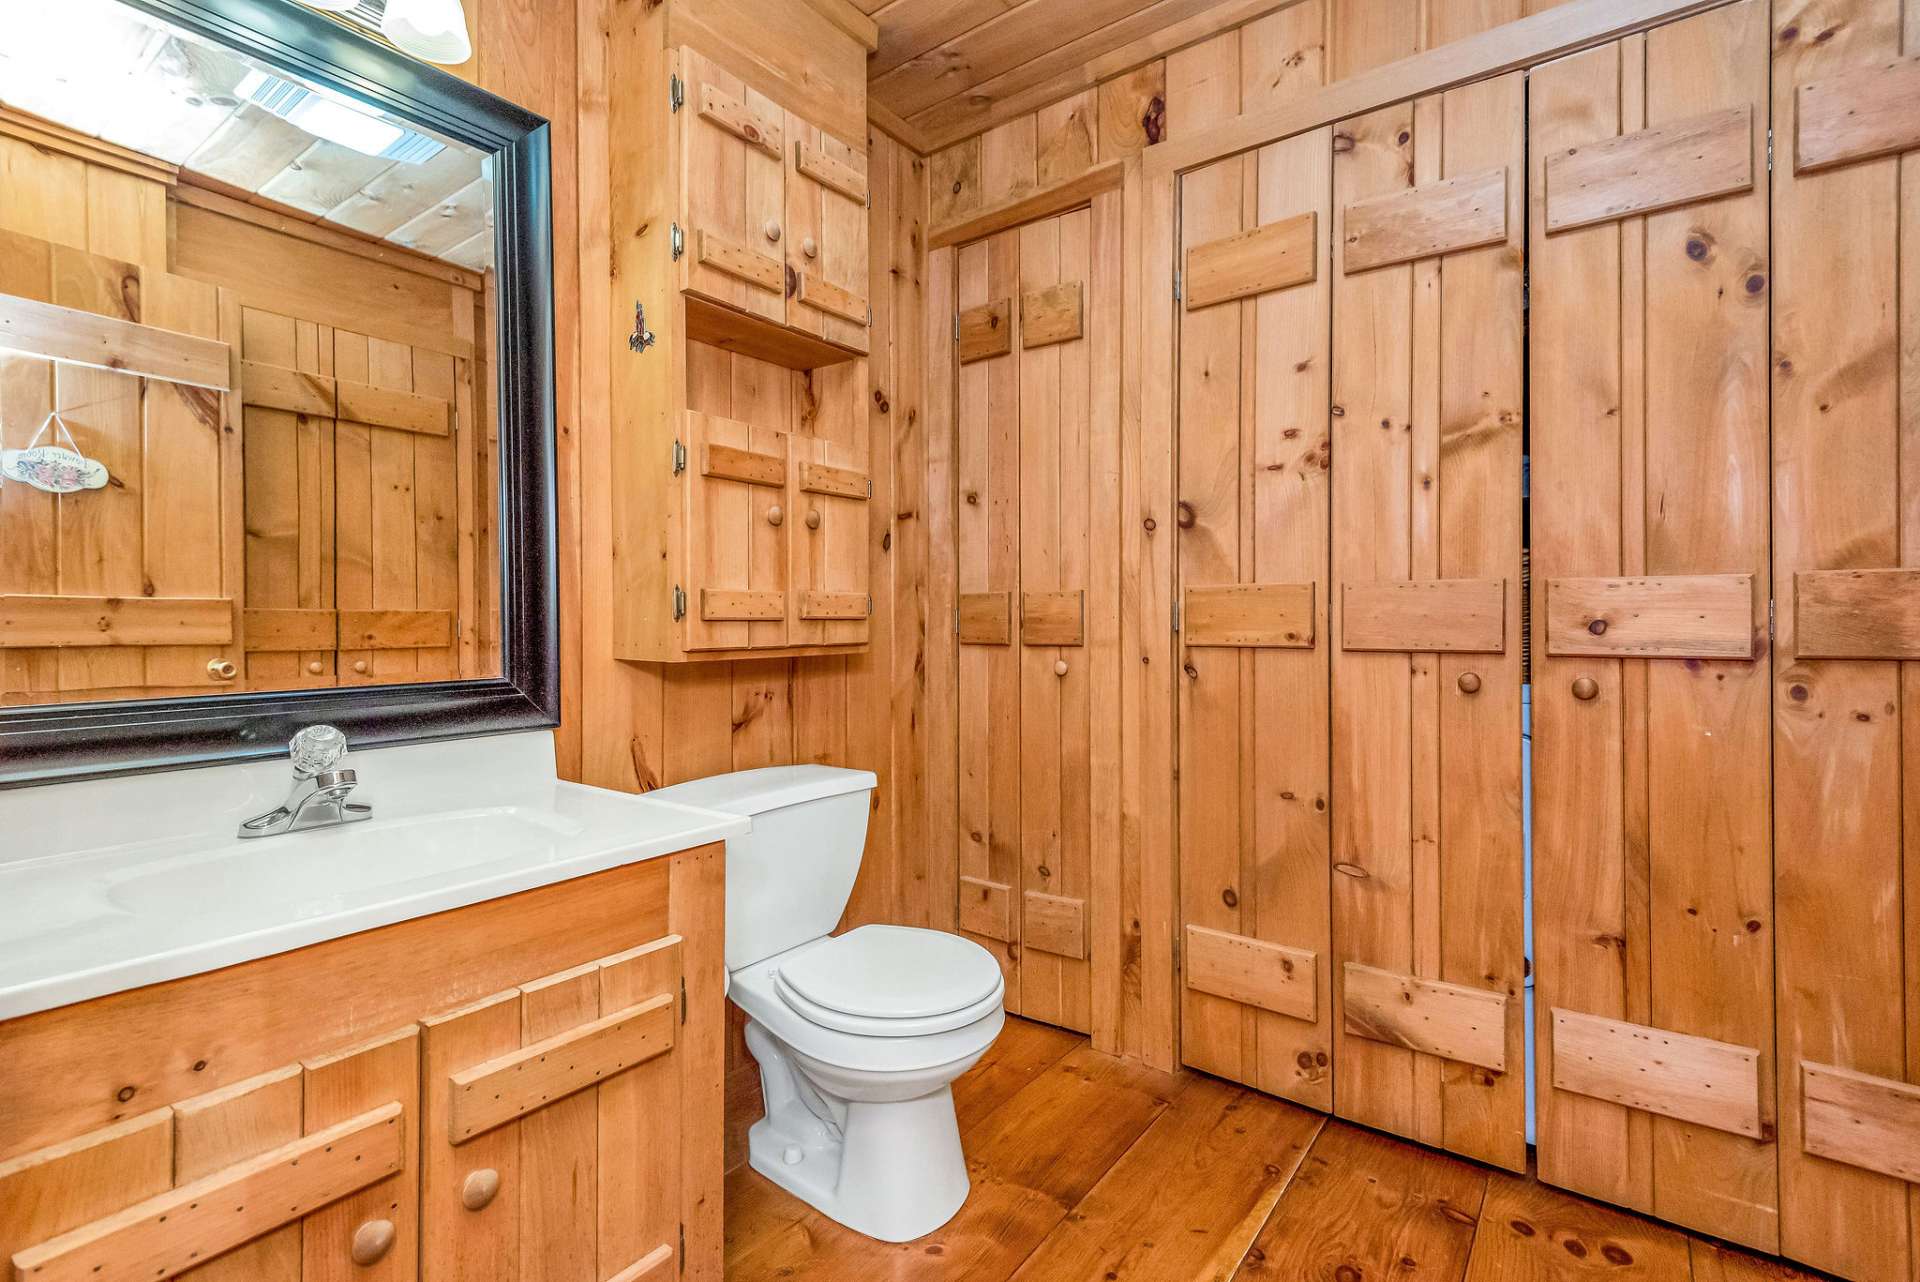 You'll love the storage in this bath with 5 closets including main floor laundry.